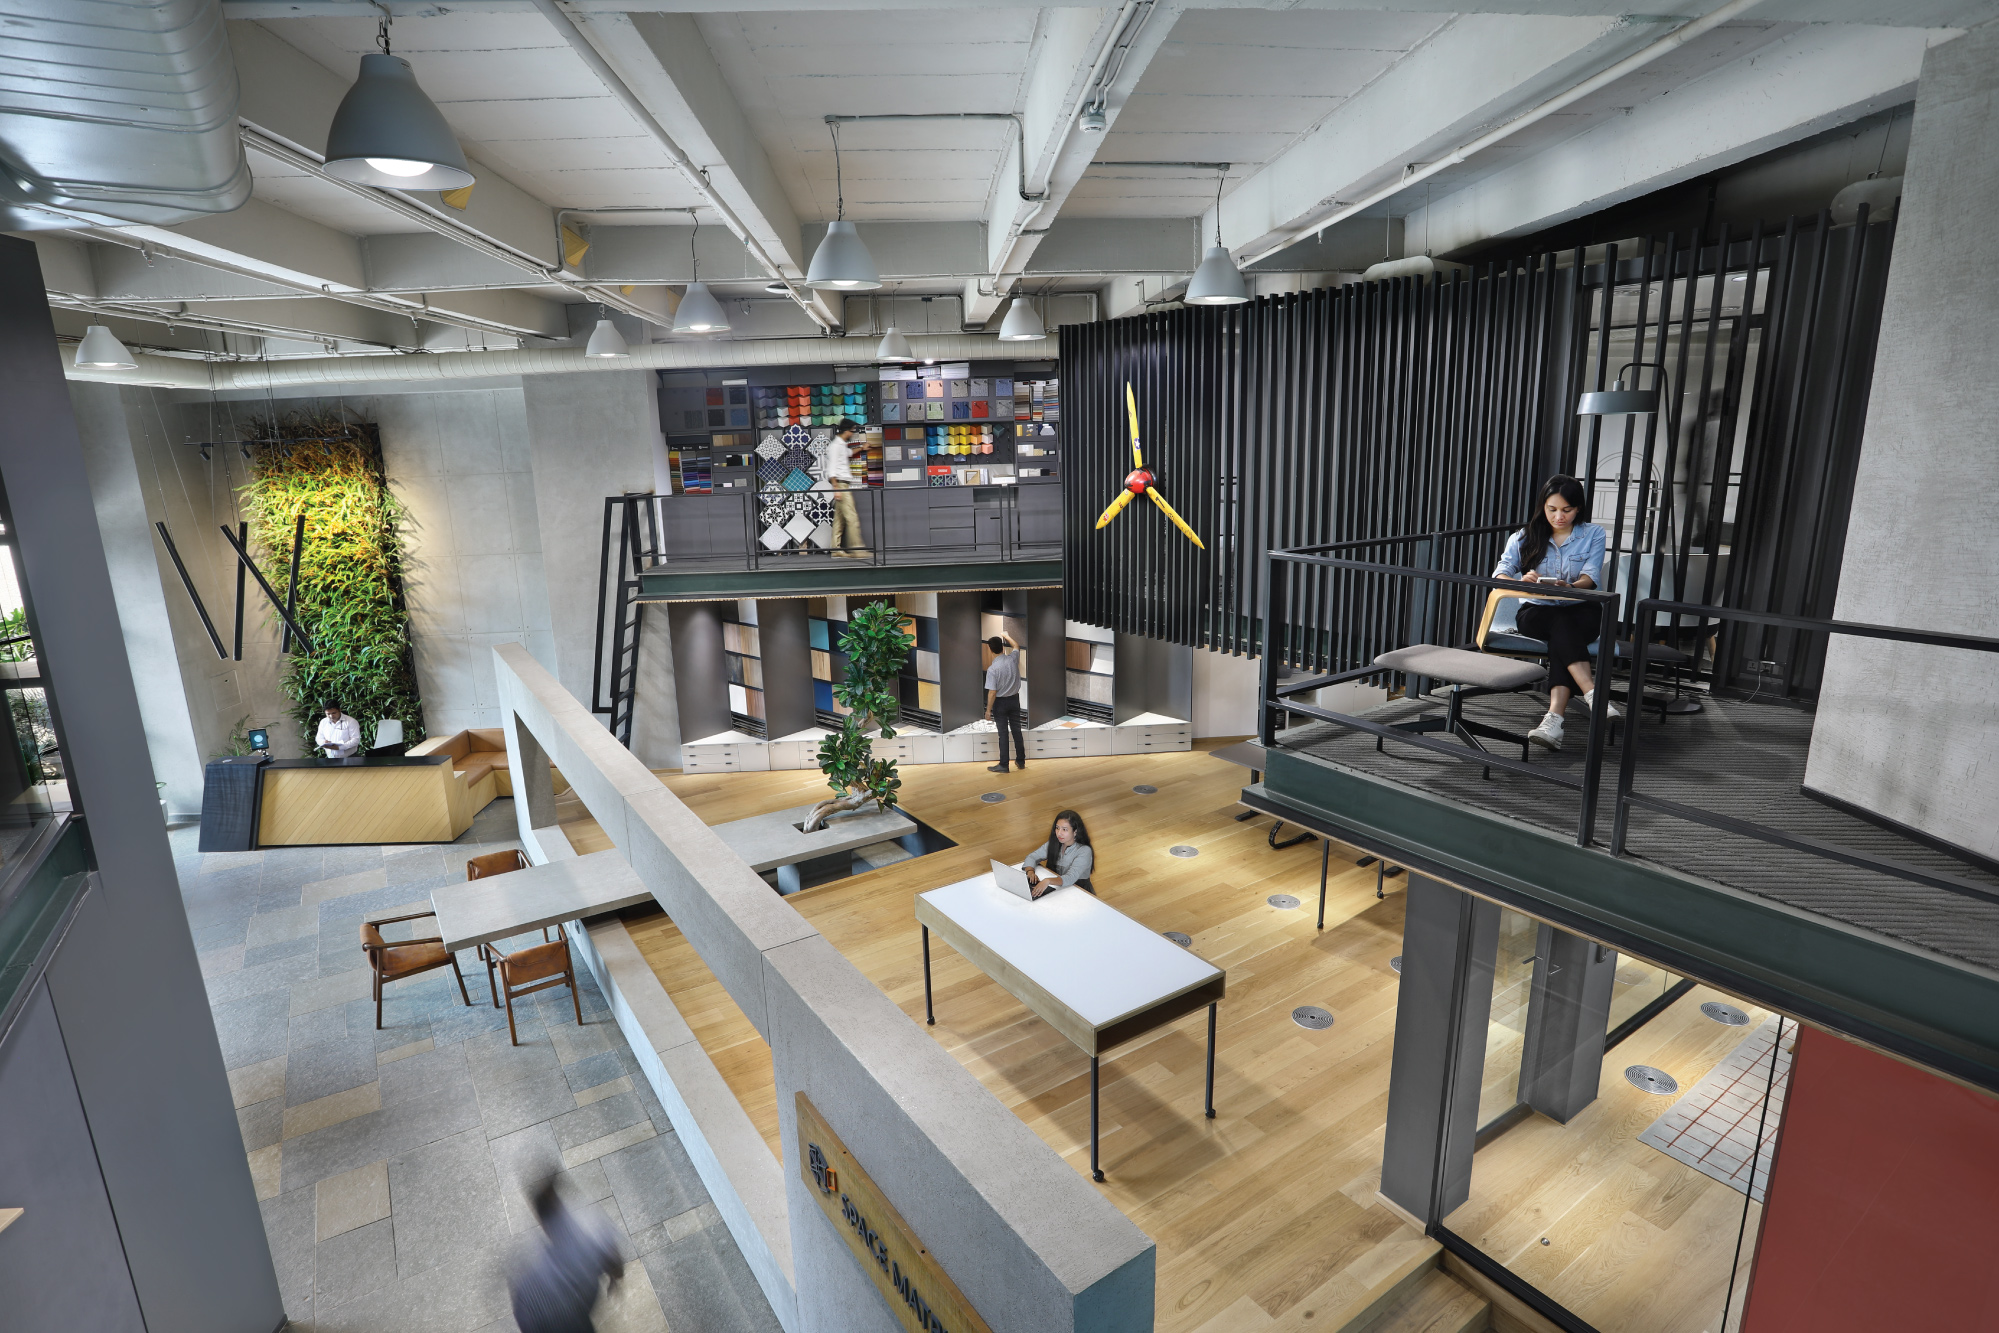 Workspace design offering an array of spaces to choose from